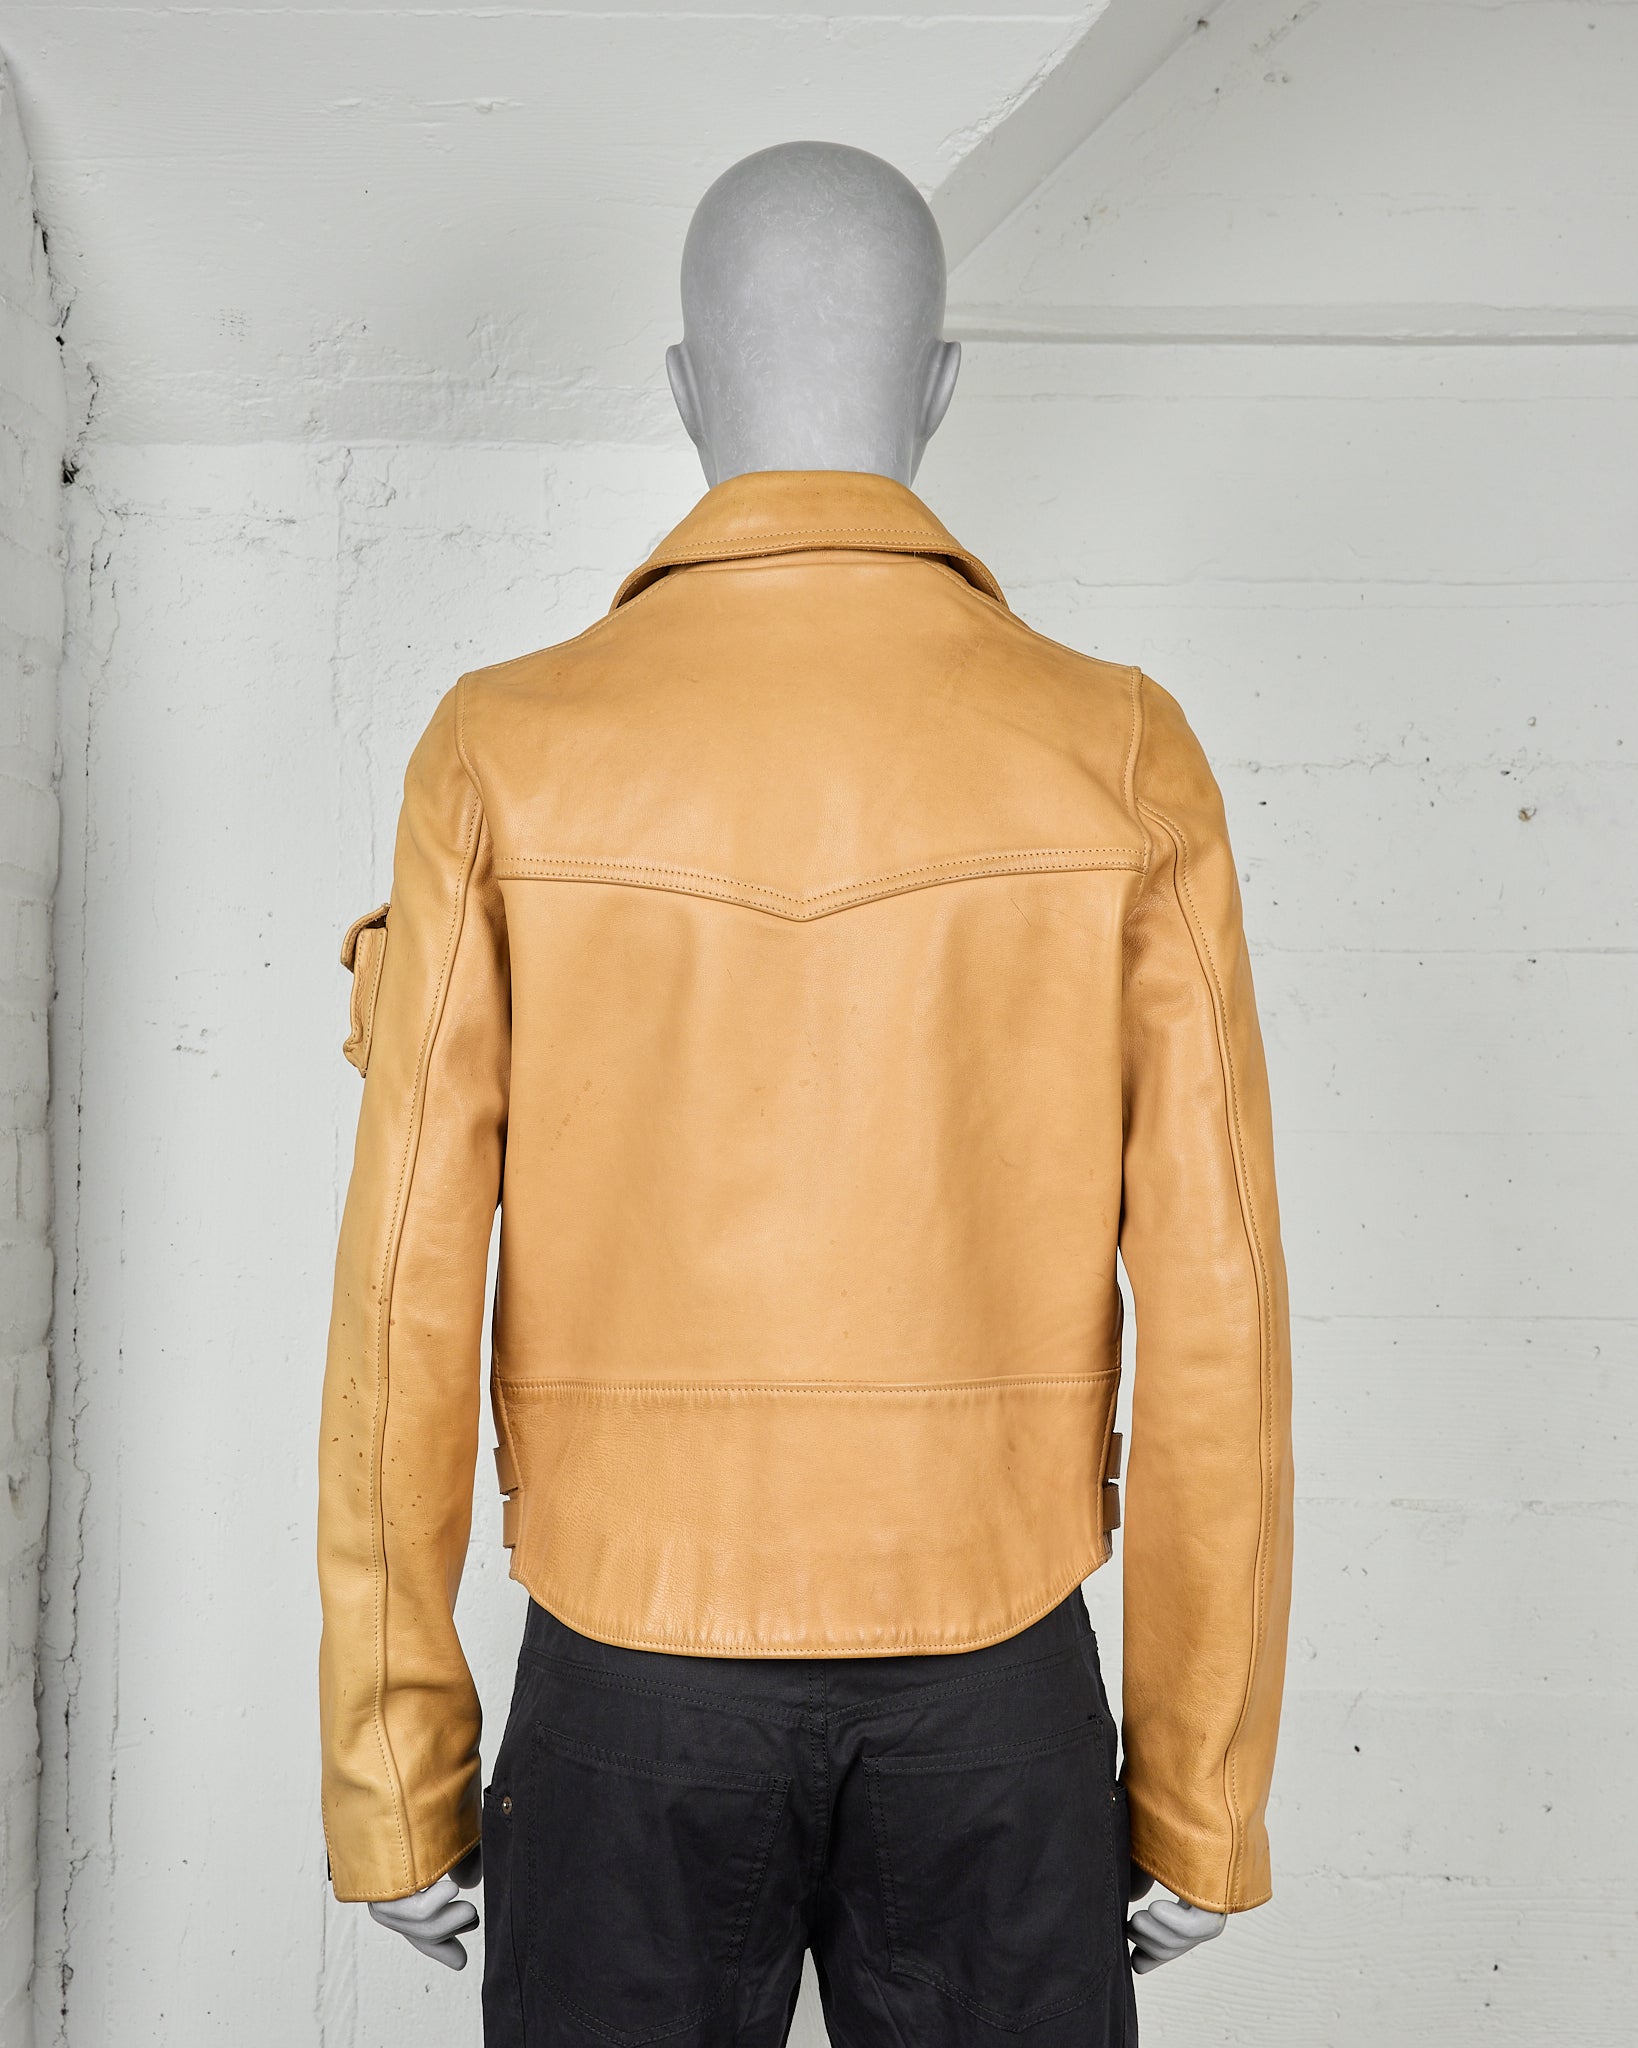 Raf Simons Leather Riders Jacket - AW03 “Closer” - SILVER LEAGUE